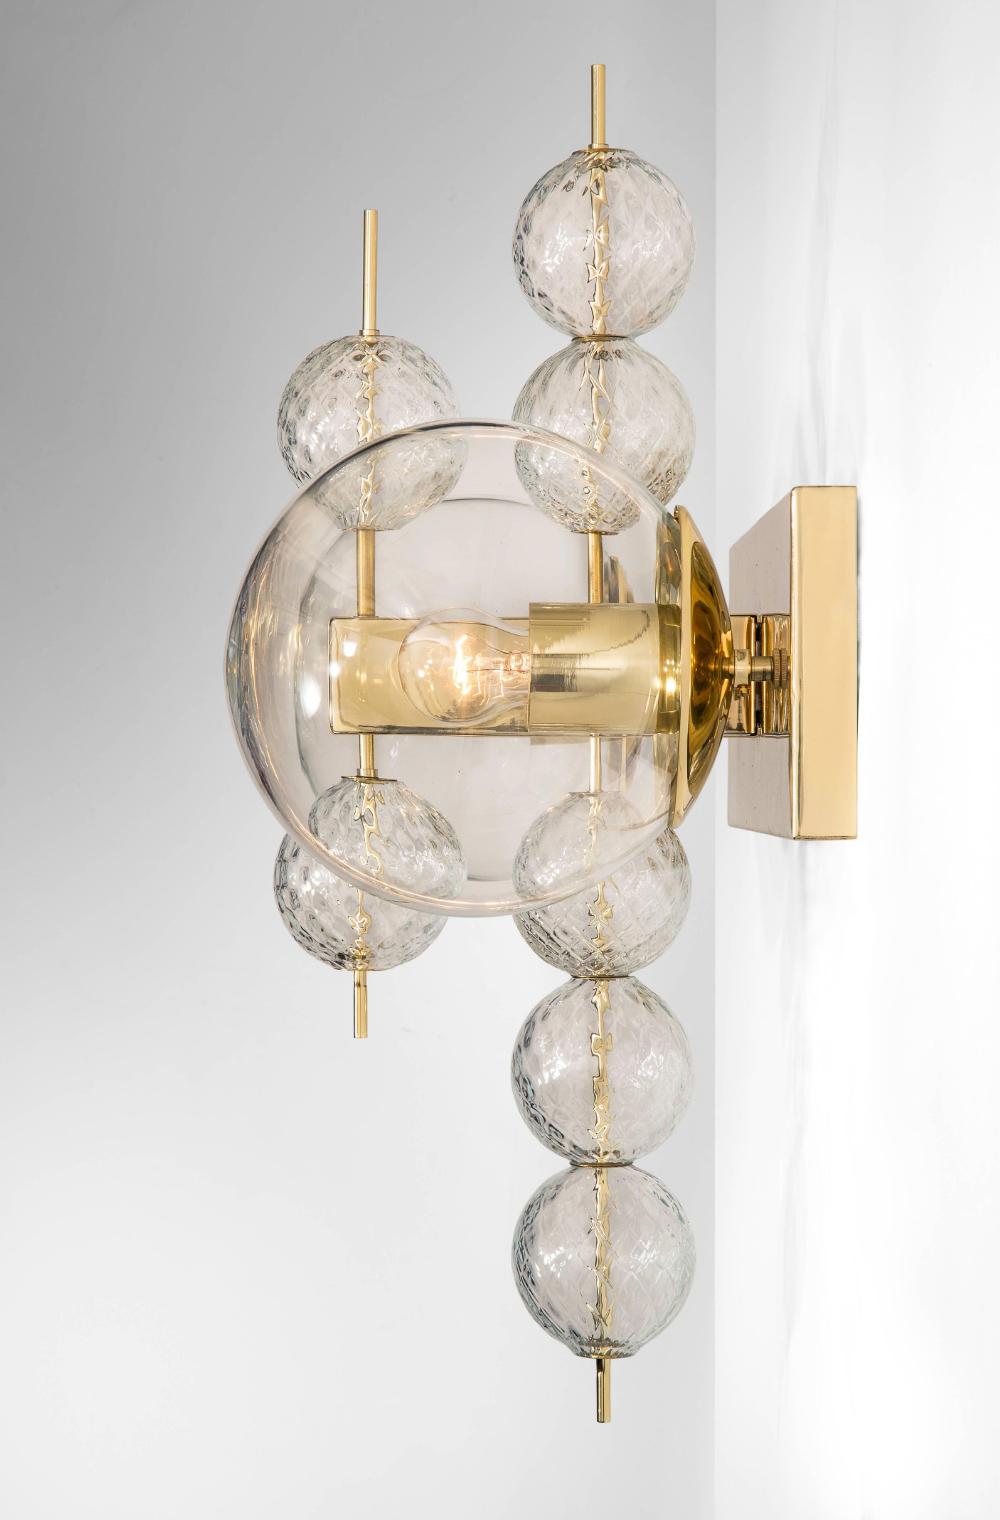 Midcentury Hotel Wall Chandelier with Brass Fixture, European, 1970s In Good Condition For Sale In Almelo, NL